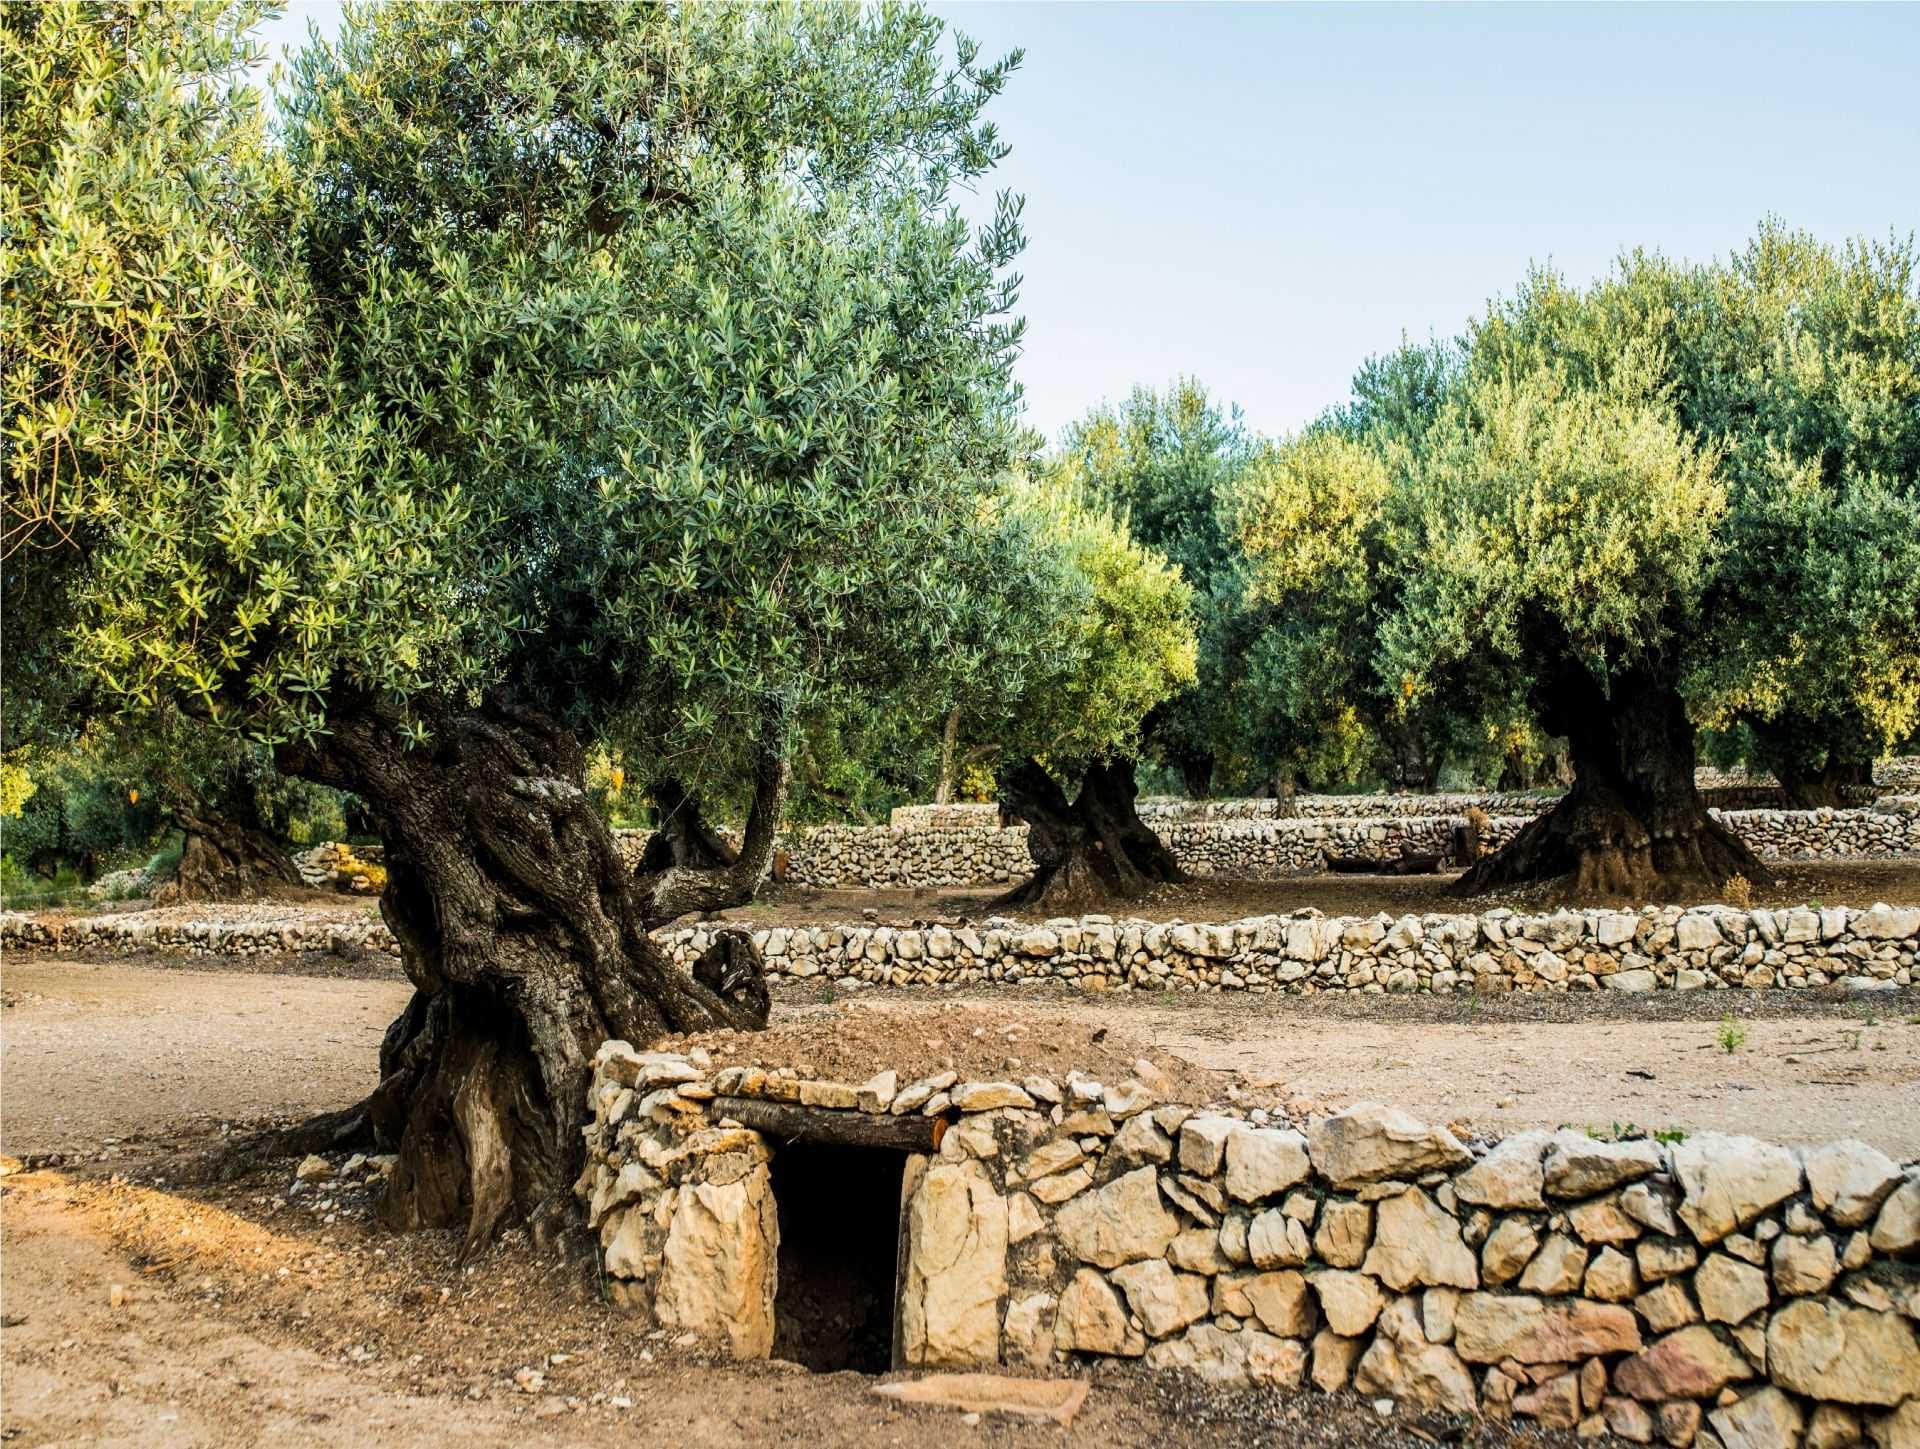 profiles-production-europe-catalan-producers-emphasize-history-and-sustainability-in-tourism-initiative-olive-oil-times